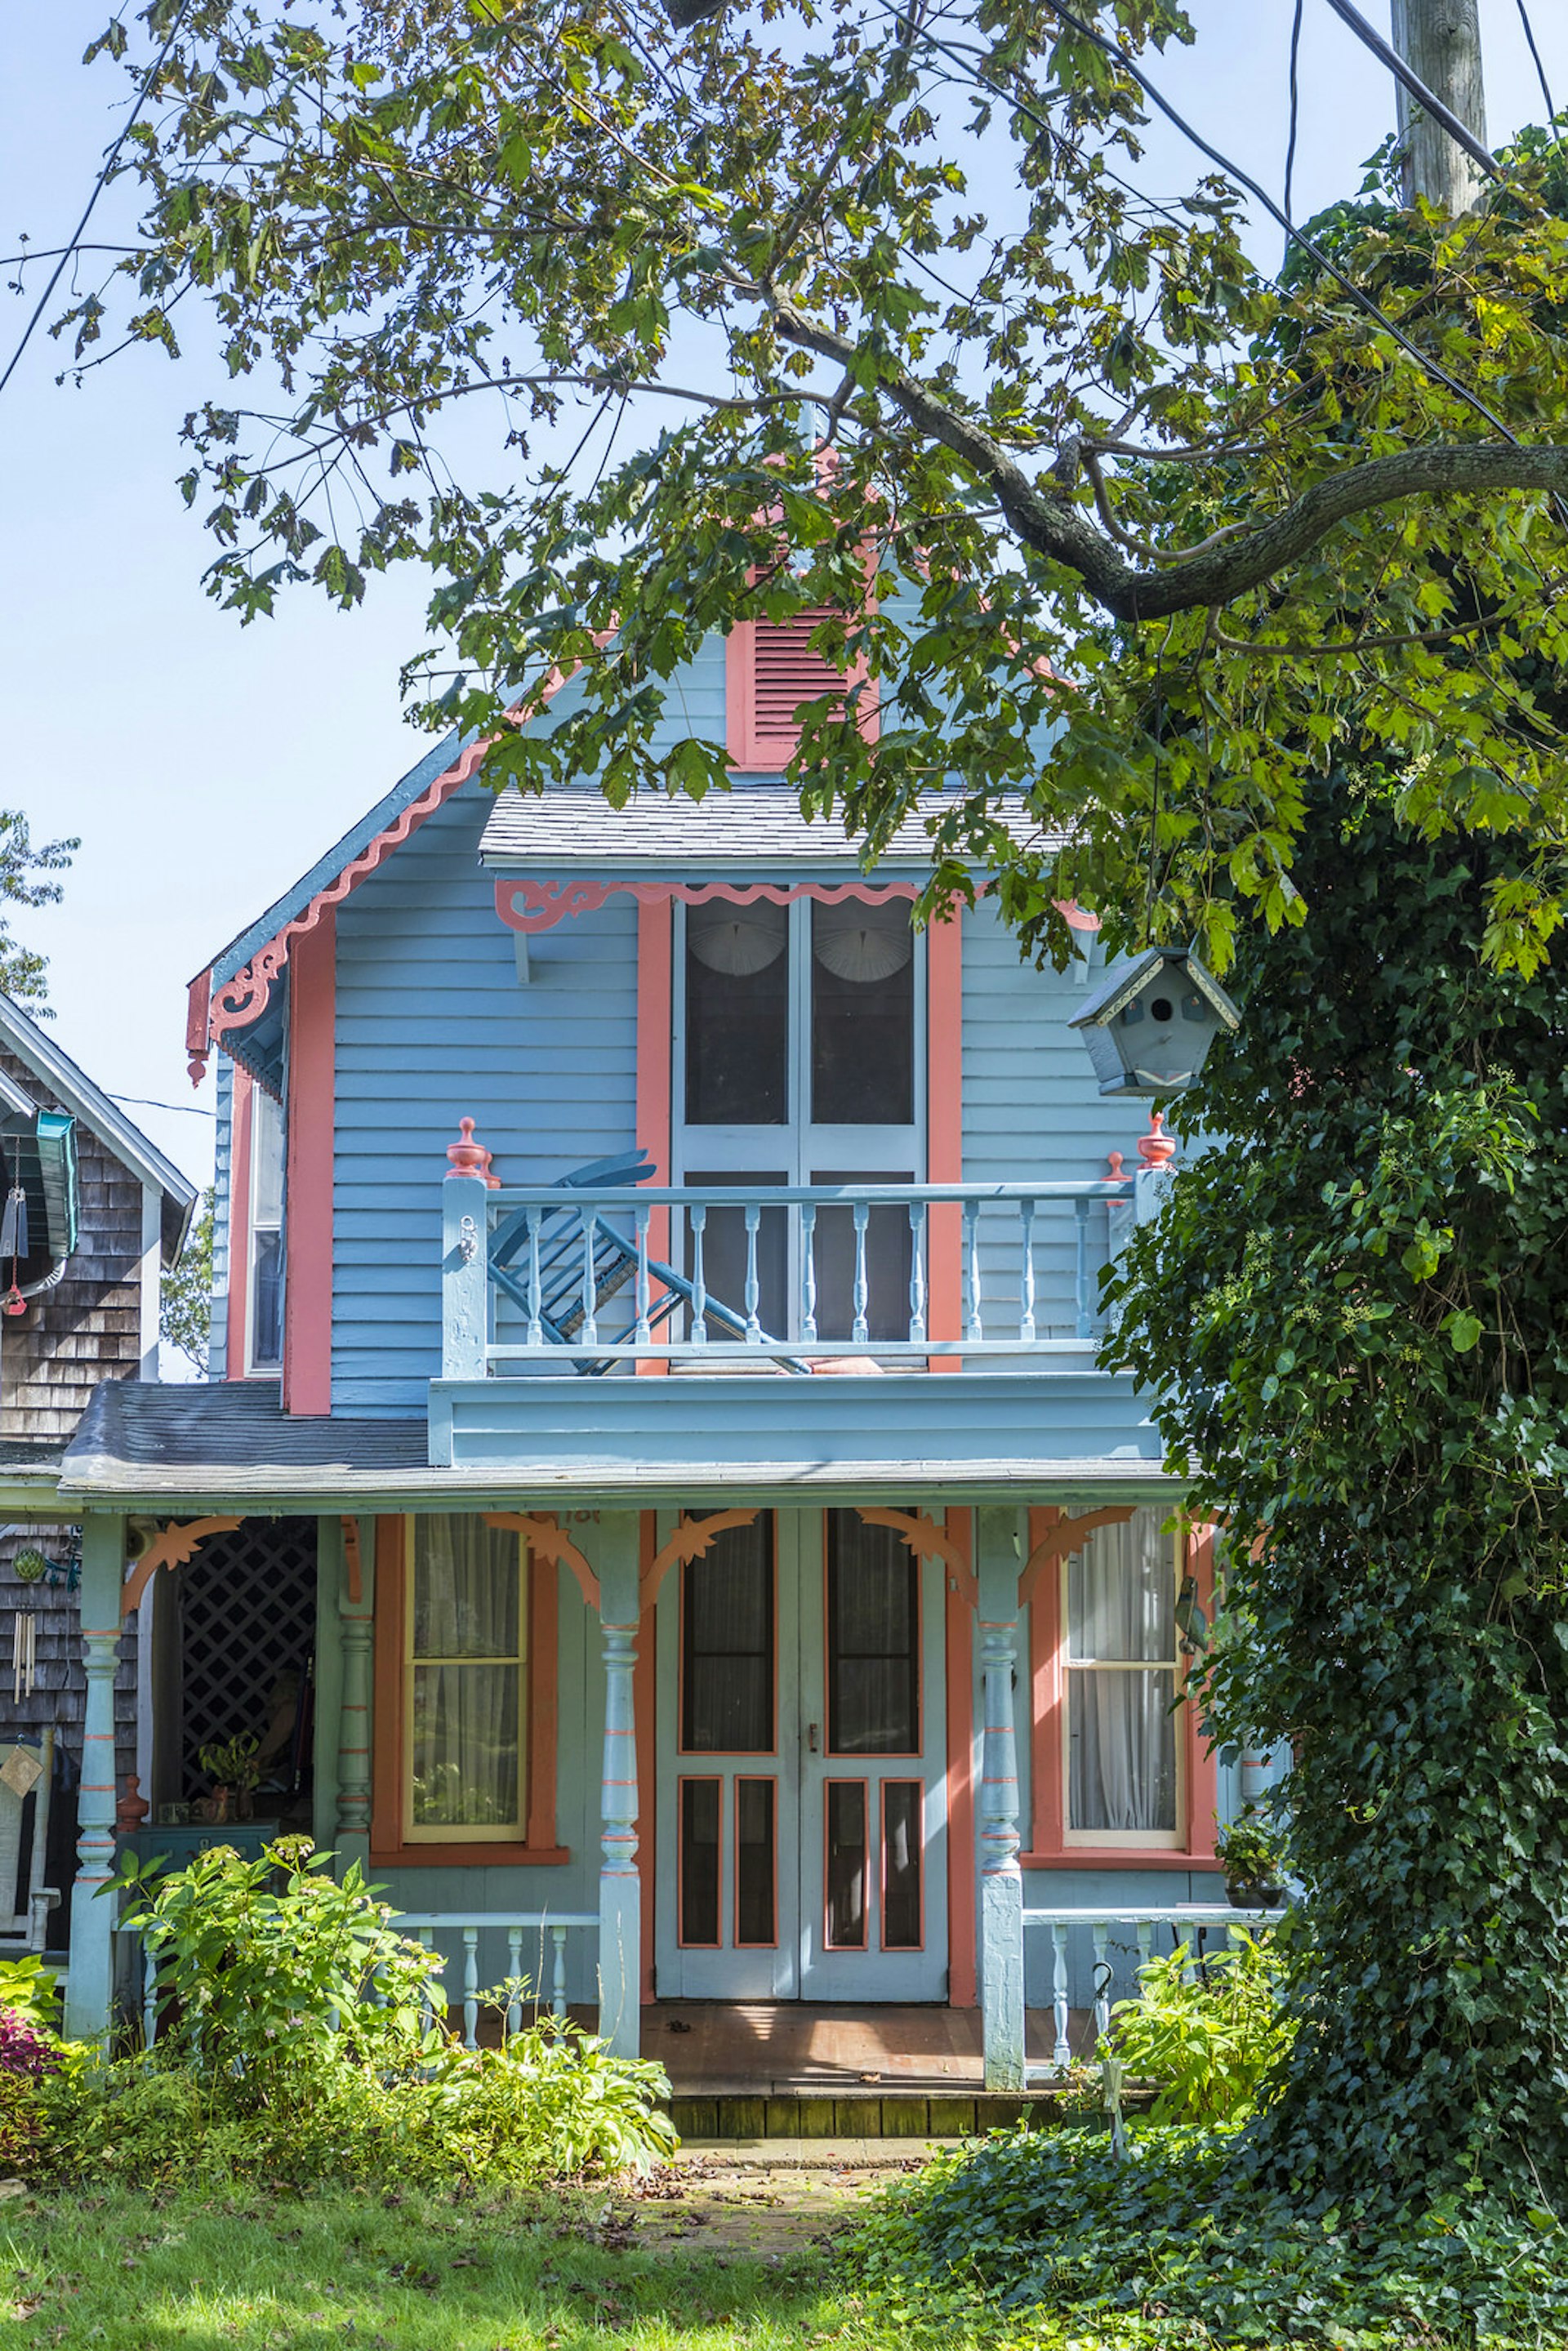 Colourful facade of a Carpenter Gothic cottage, Martha's Vineyard © travelview / Shutterstock